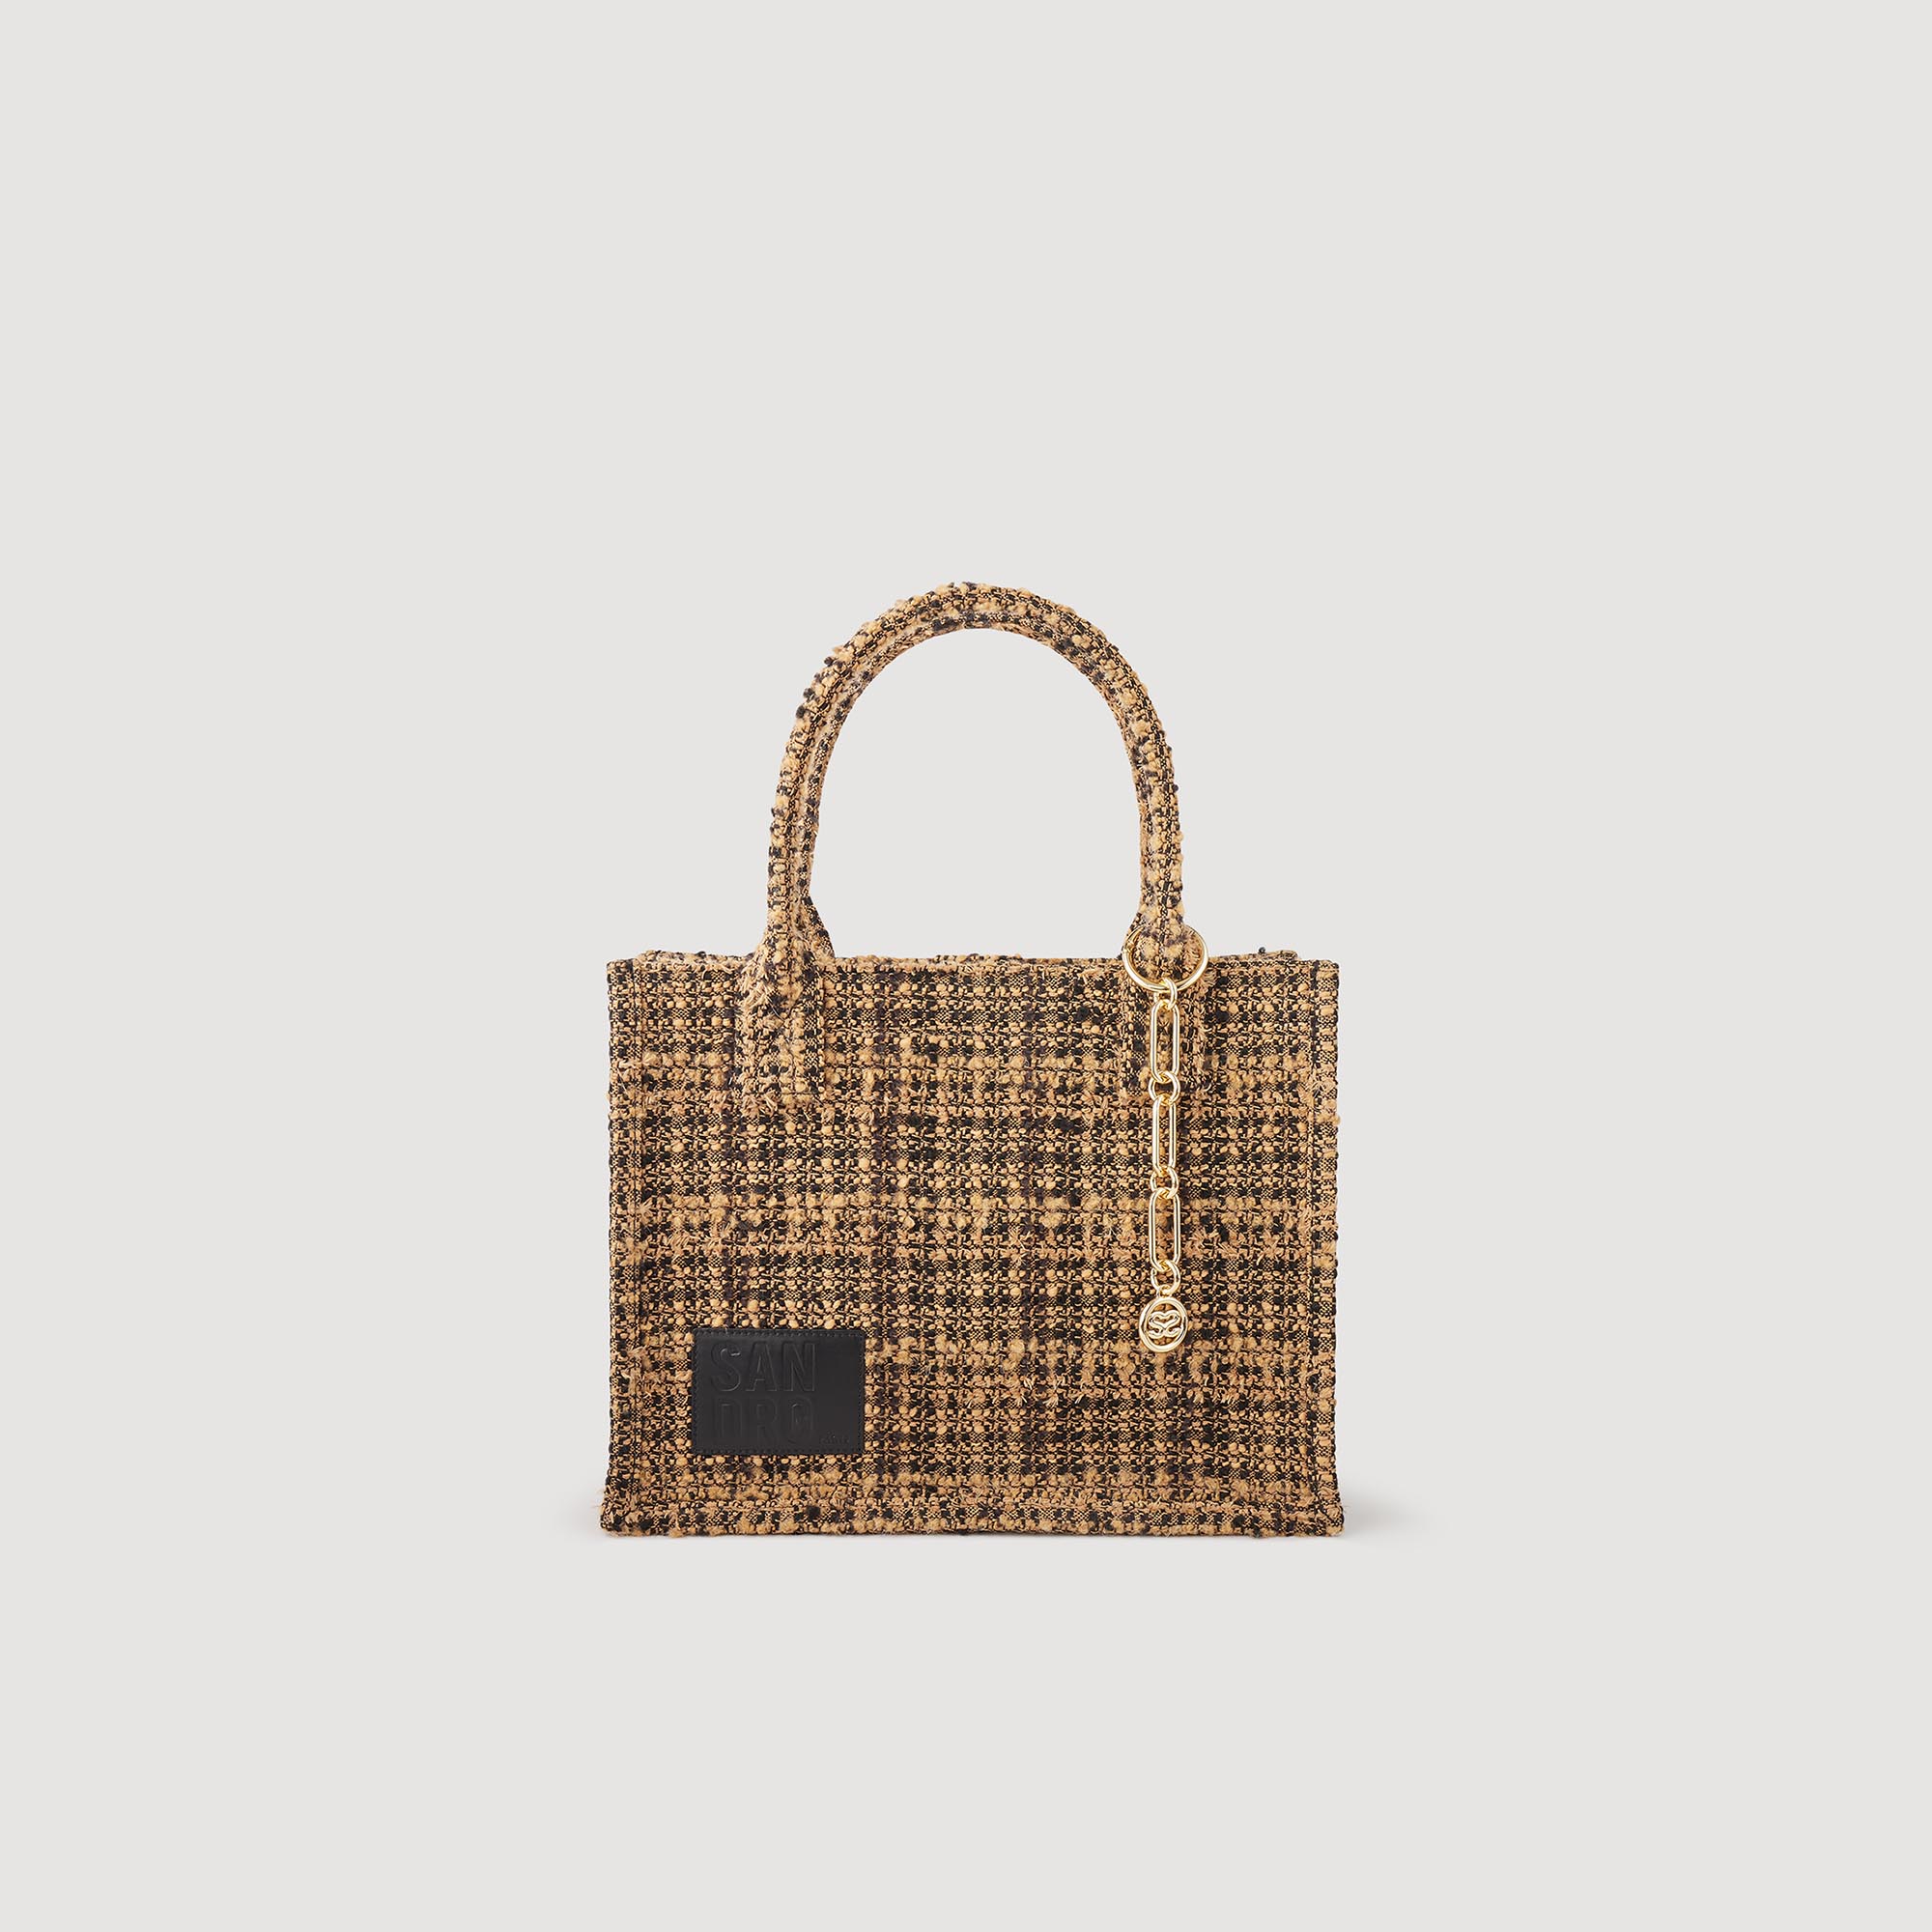 Sandro cotton Plain tweed tote bag with handles, magnetic fastening and removable jewellery chain